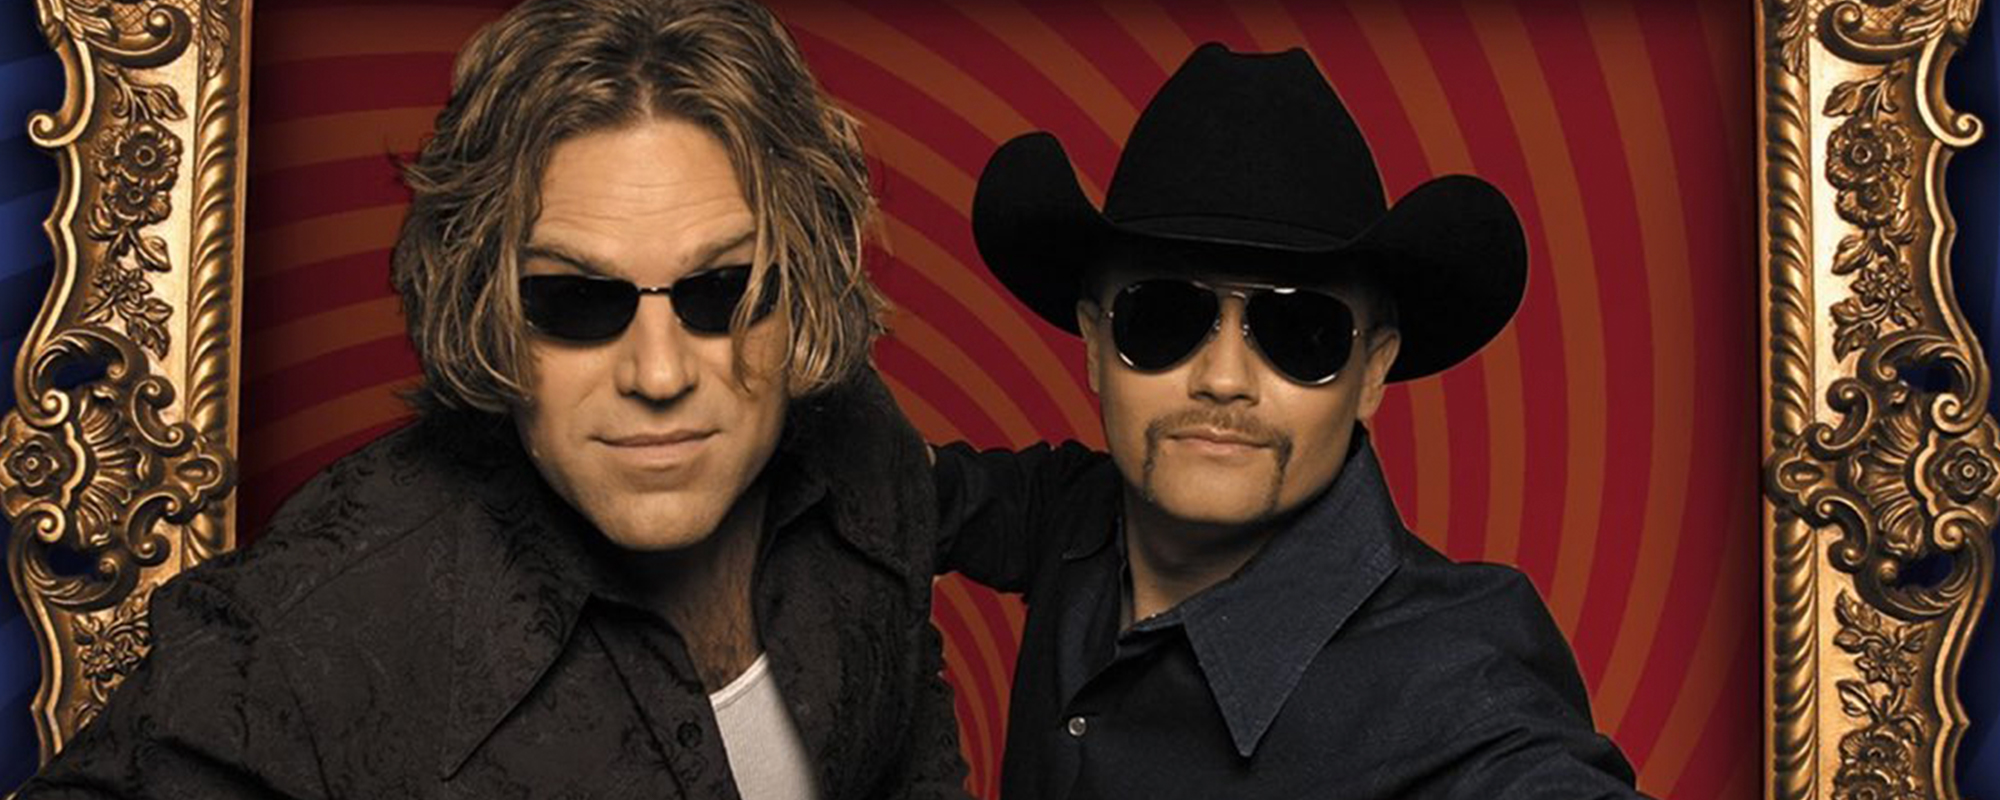 The Raunchy Meaning of “Save a Horse (Ride a Cowboy)” by Big & Rich